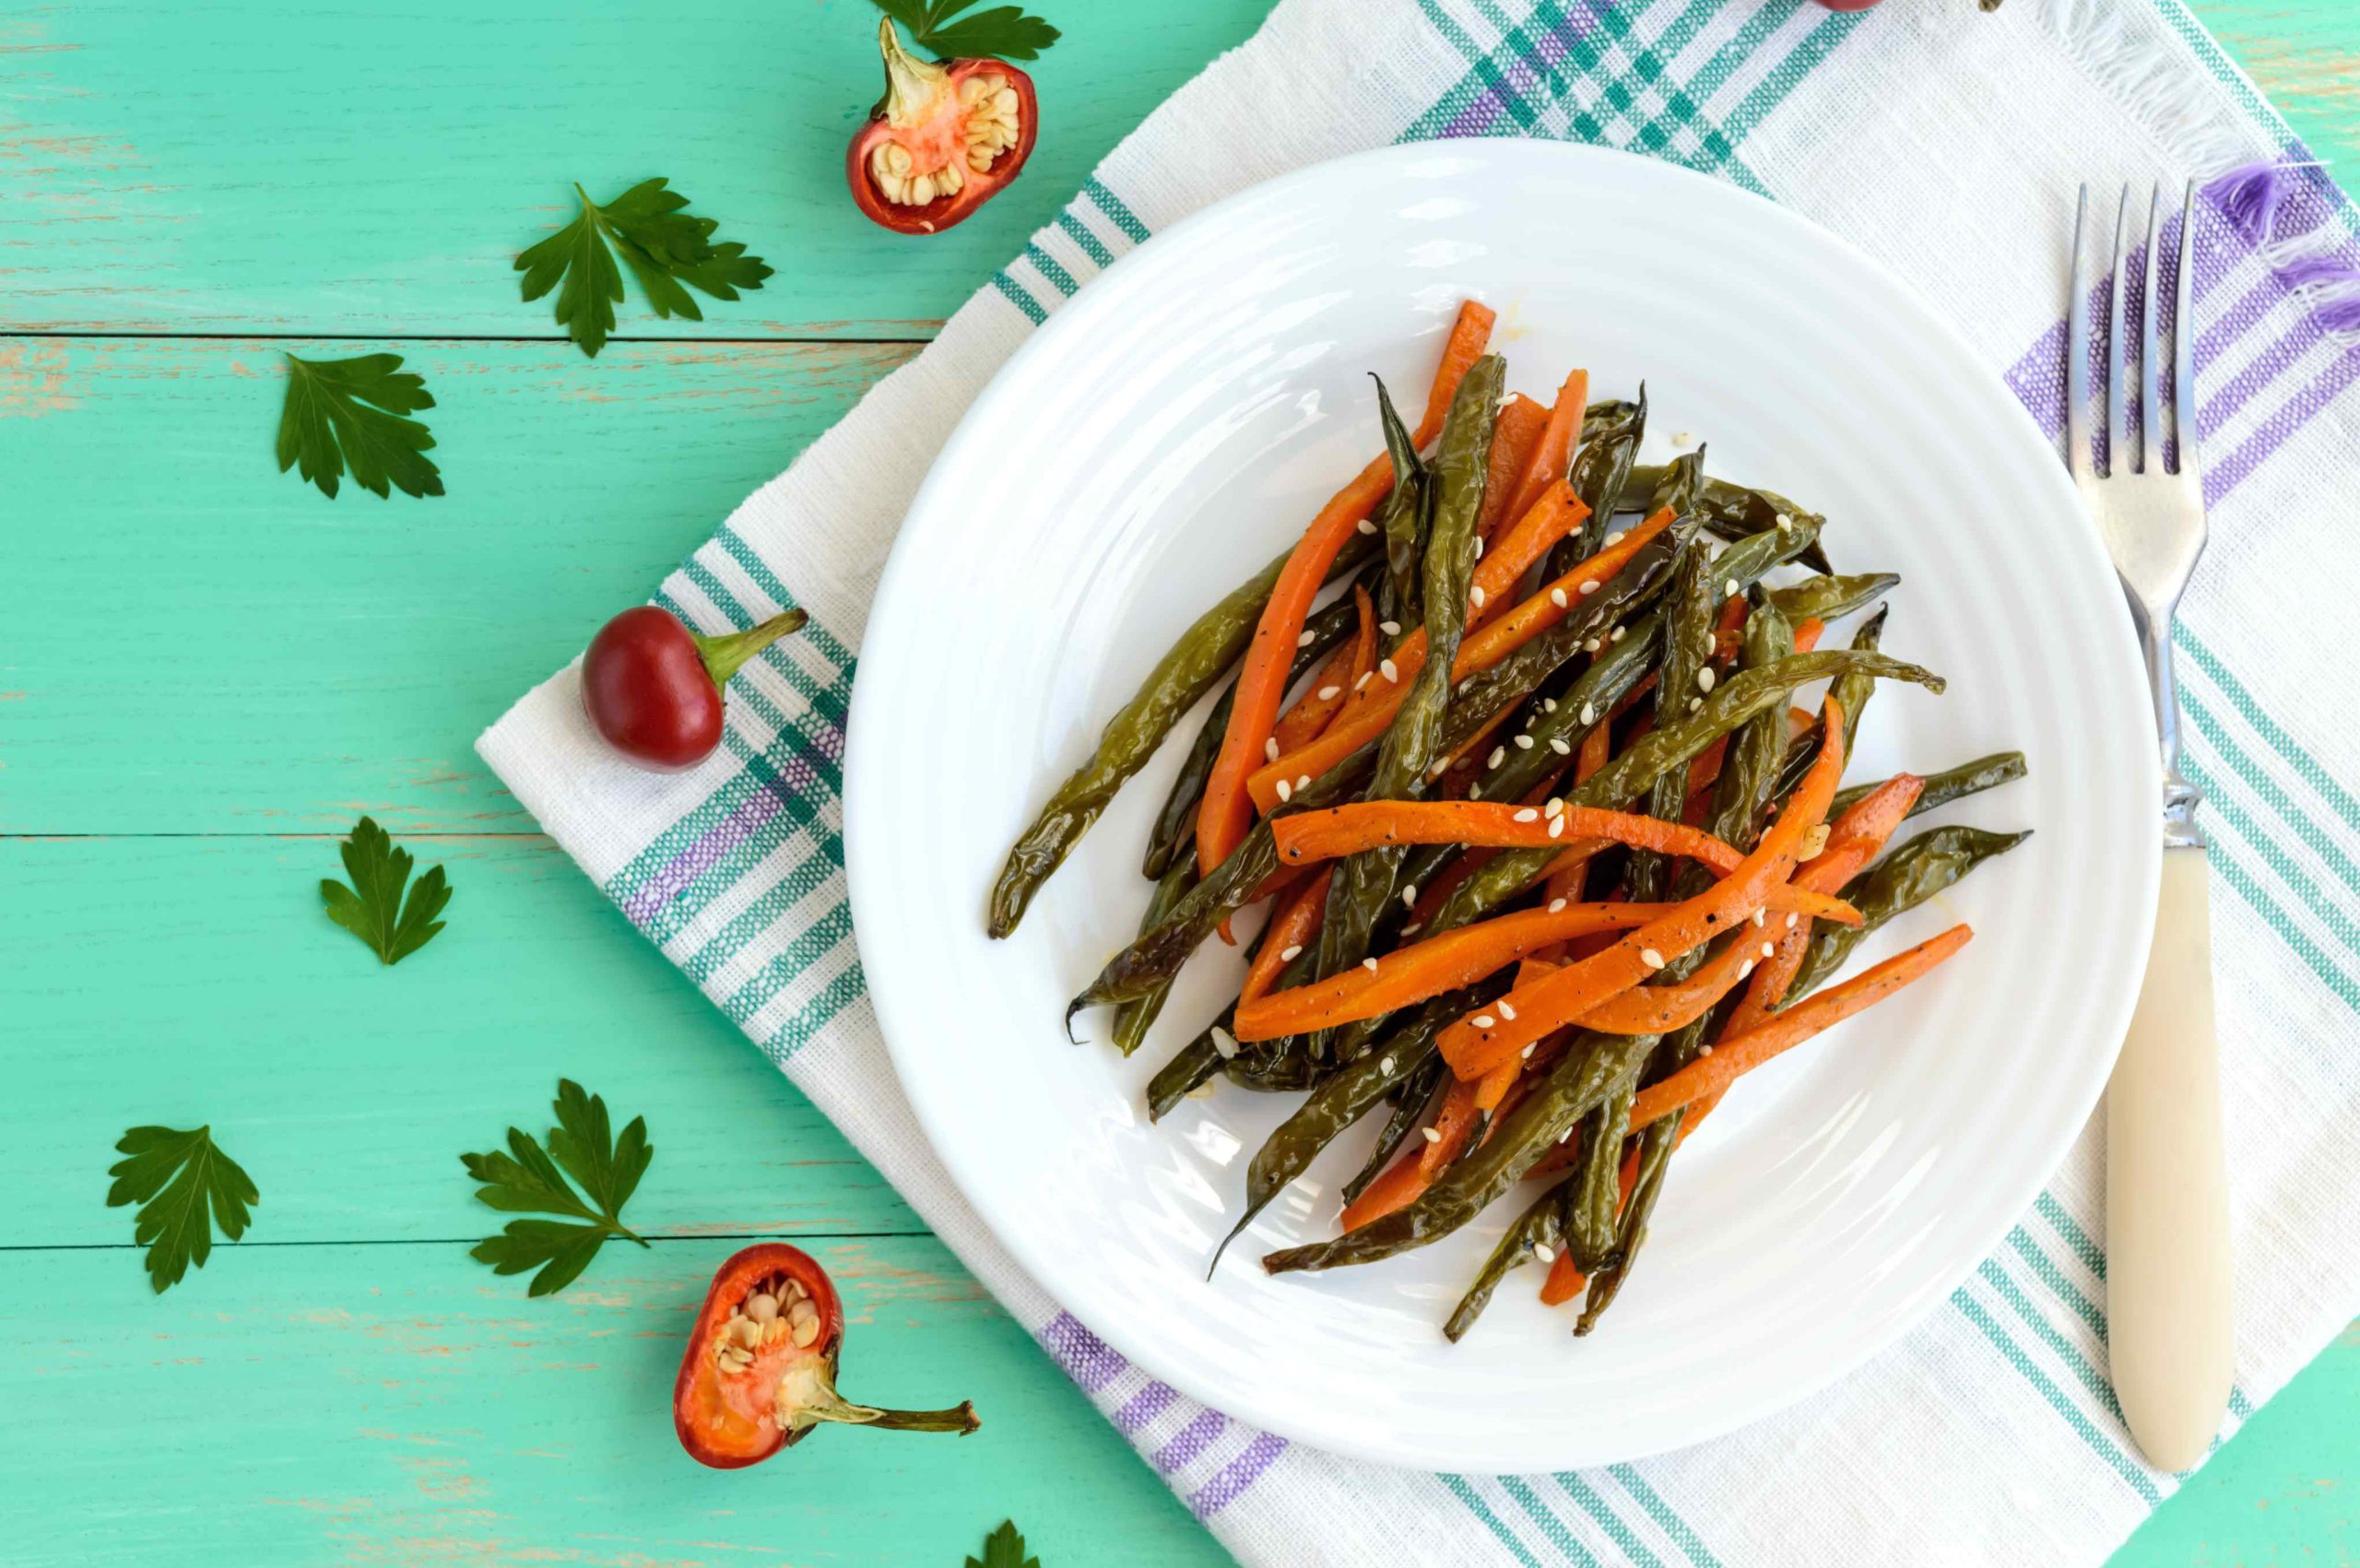 Baked green beans and carrots - vegan diets. The top view